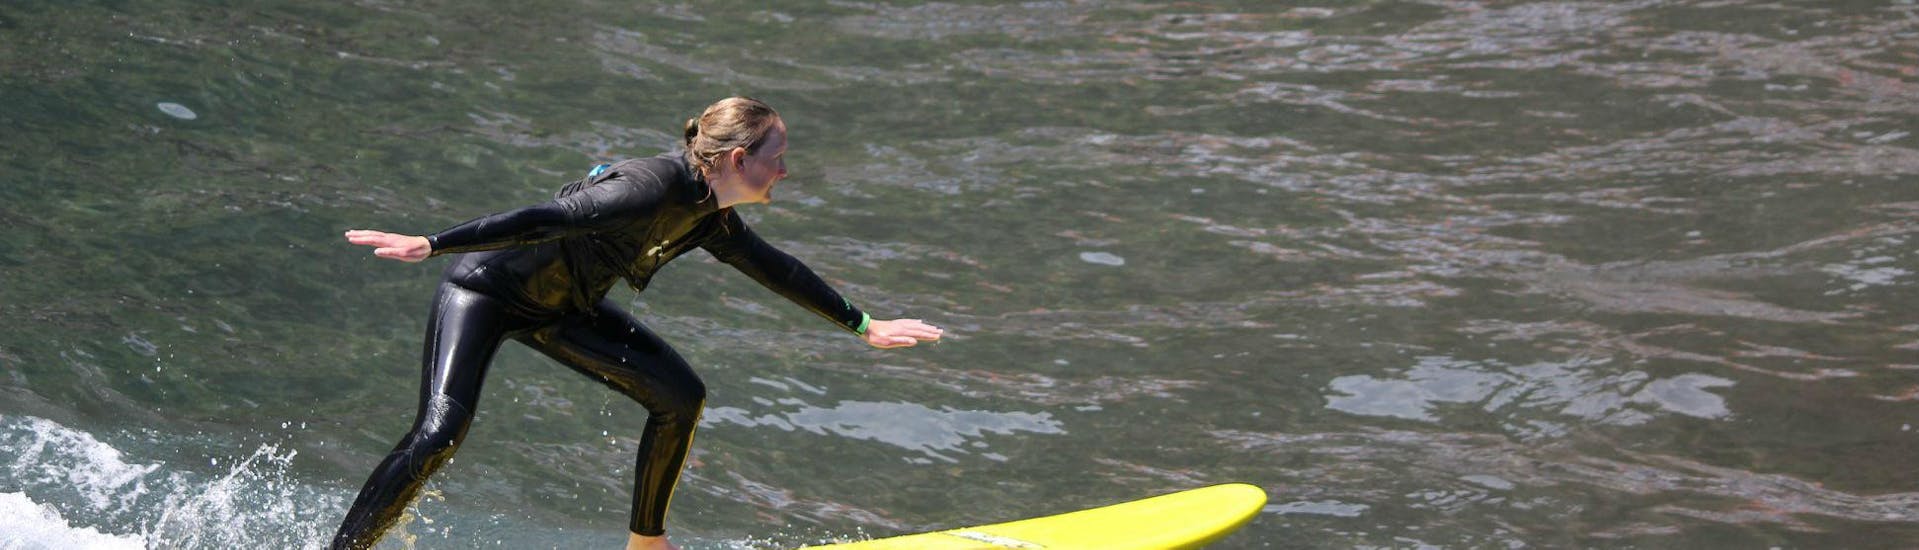 Private Surfing Lessons for Kids & Adults - All Levels.